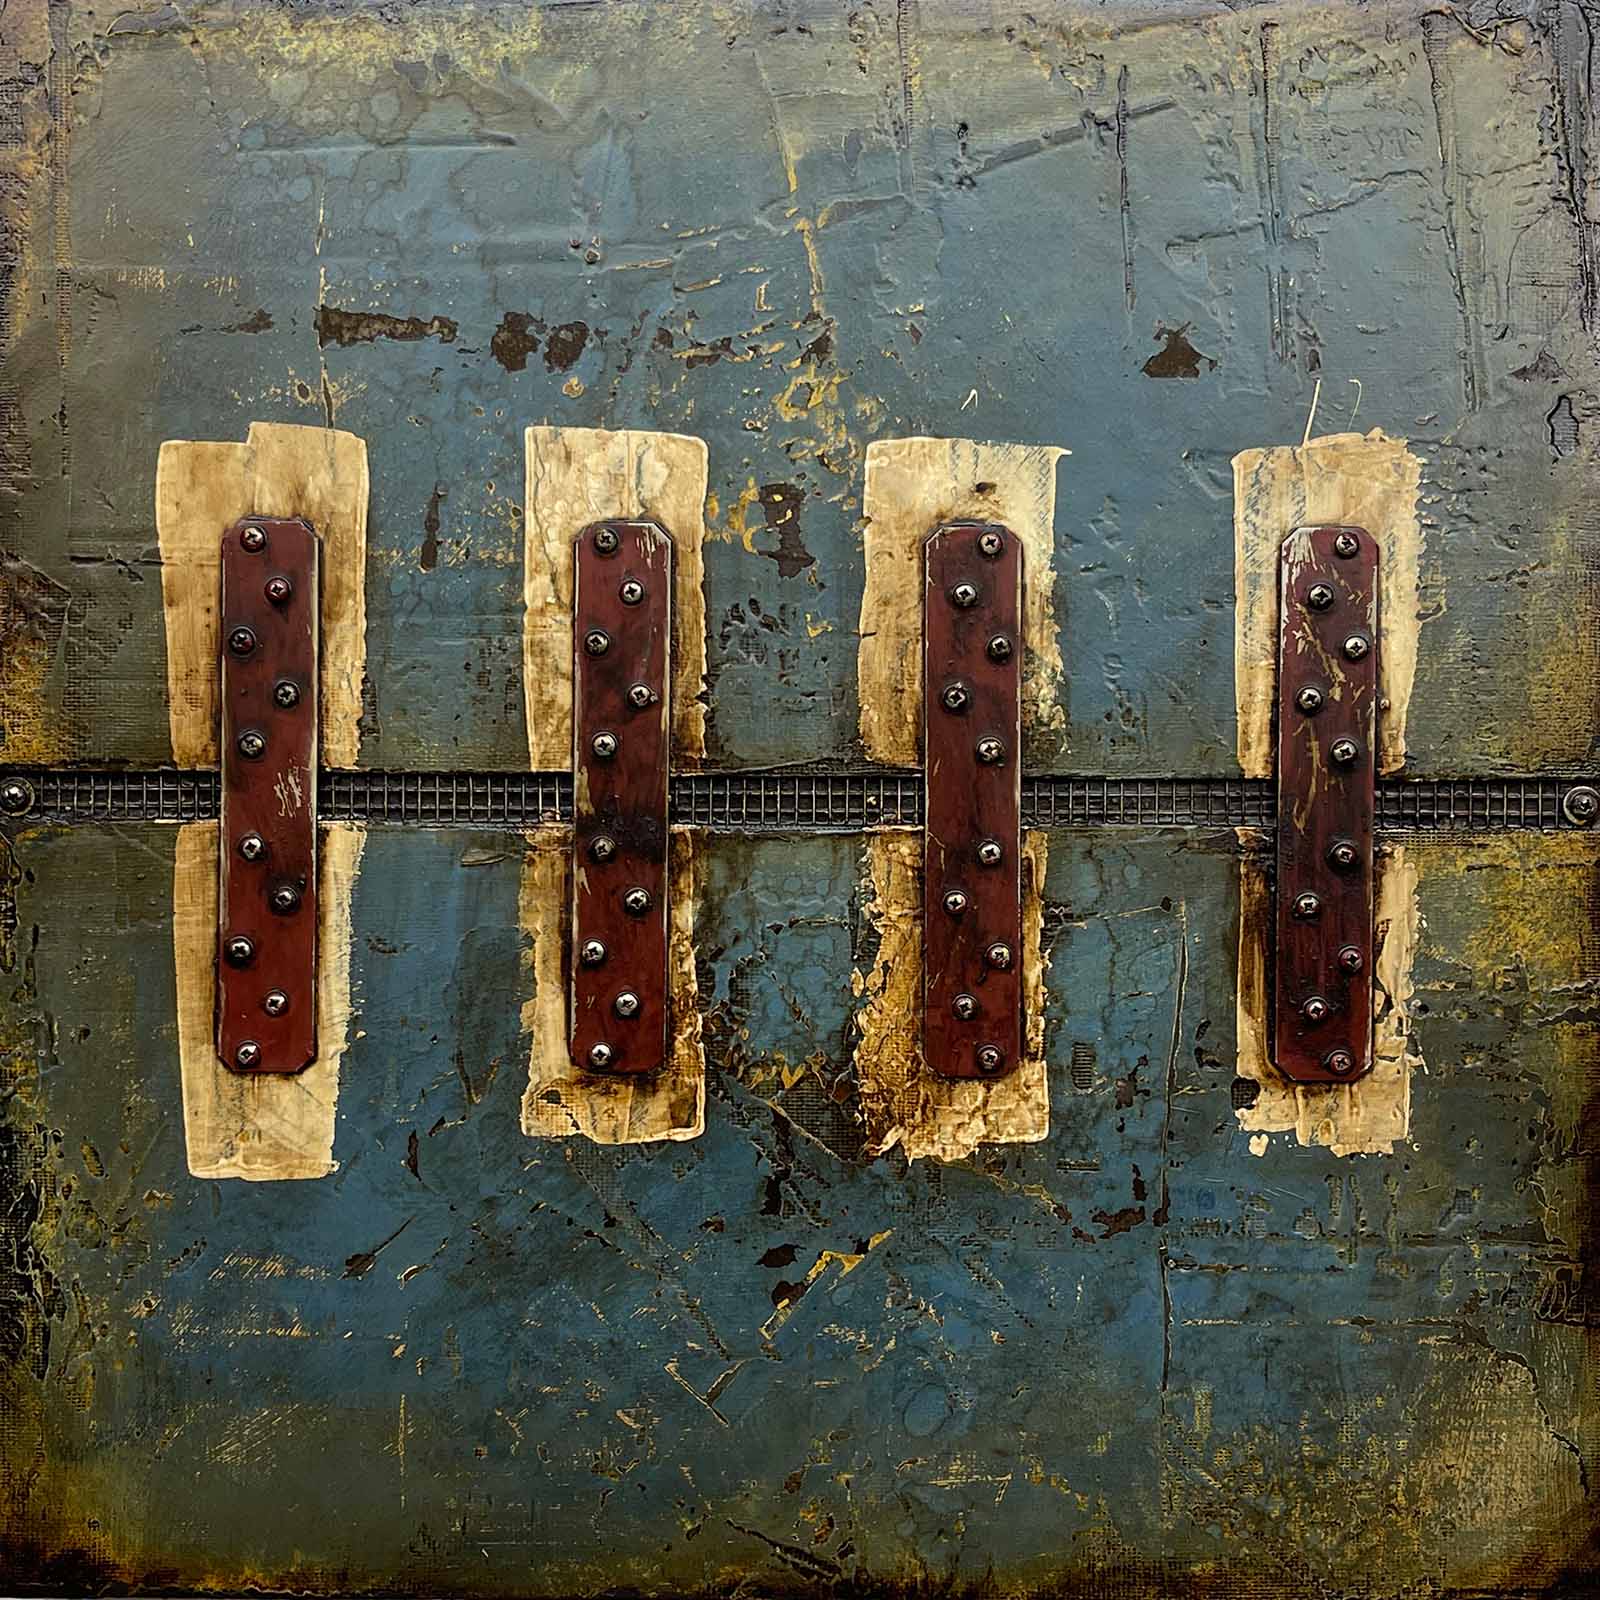 Abstract, assemblage art titled: Four 12ga Strap Ties Across a Textured Surface